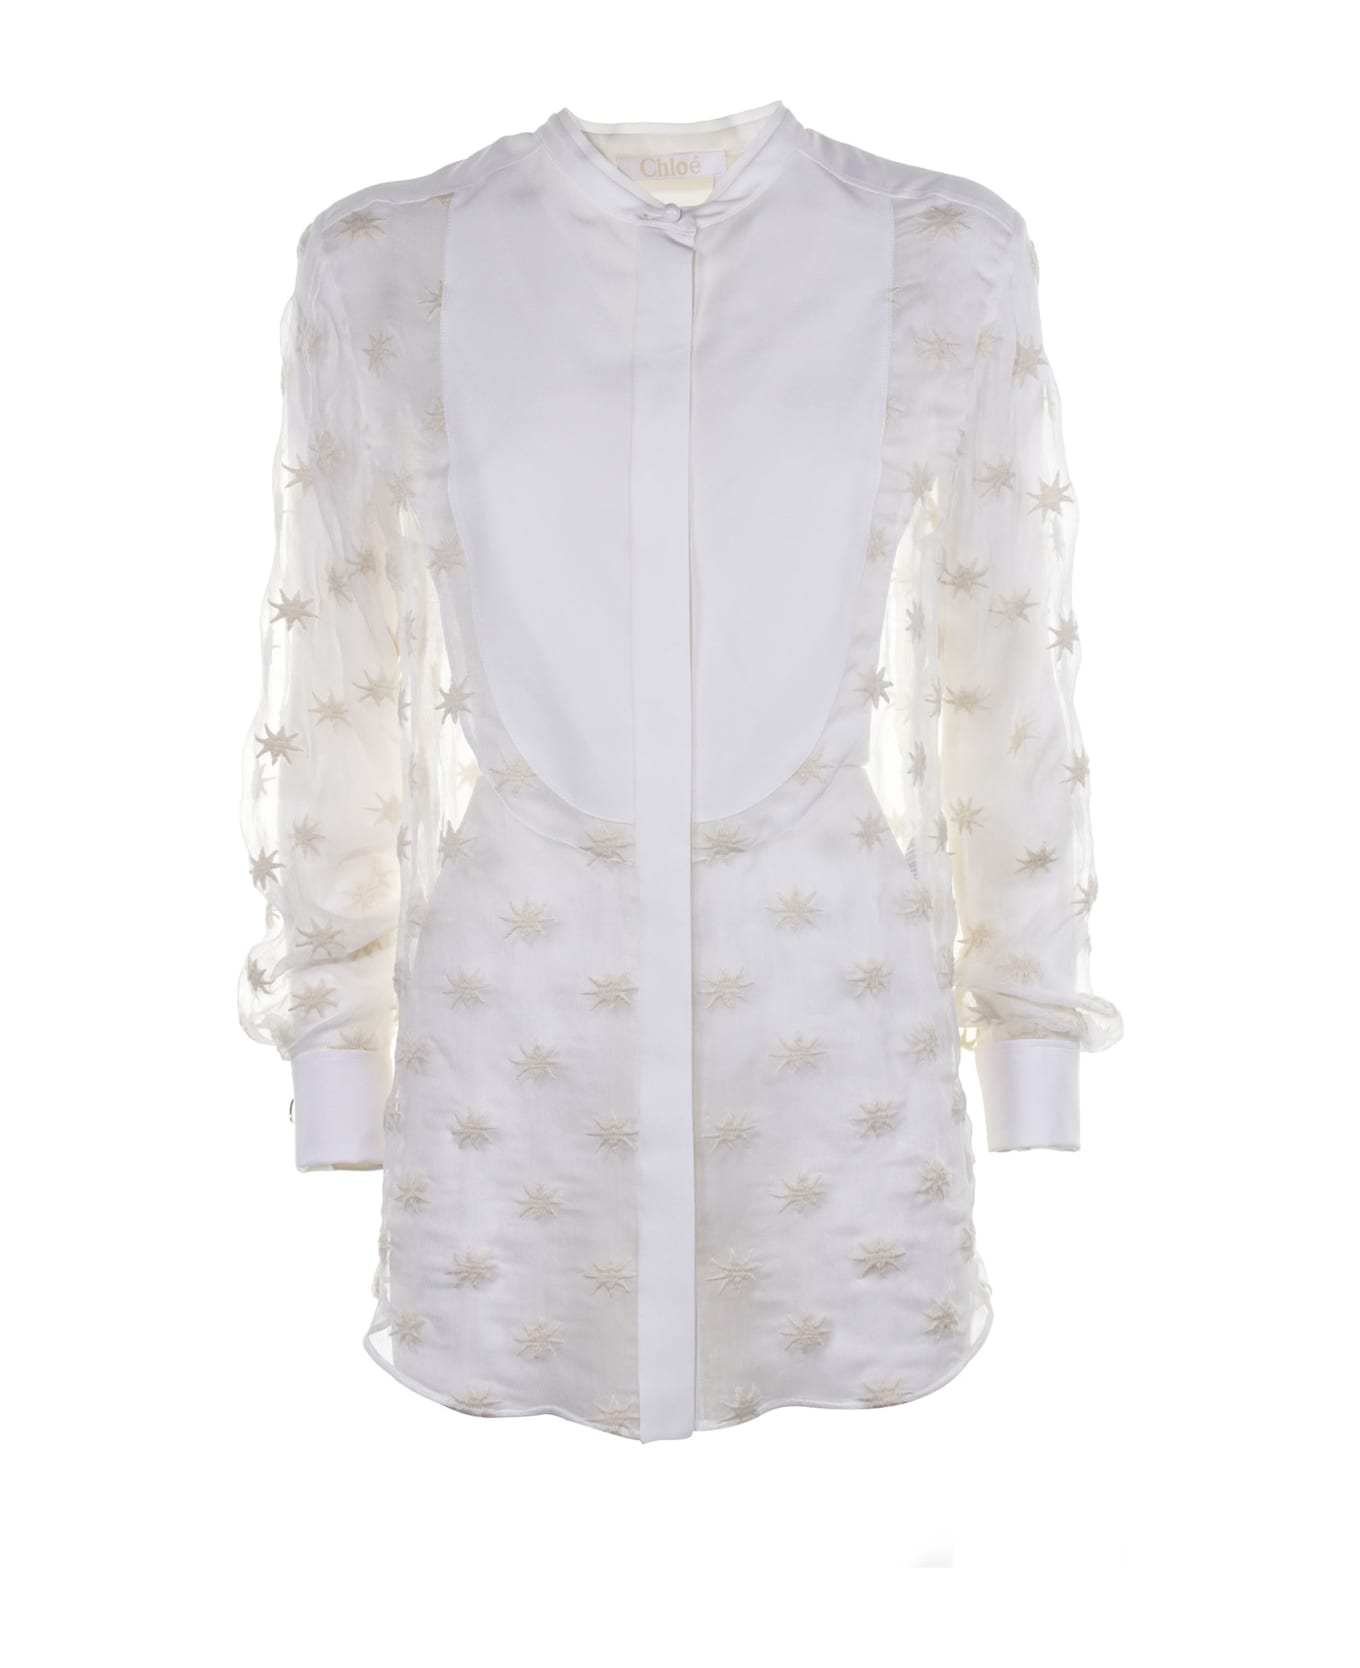 Chloé Shirt Crafted In Ivory Silk Mousseline - ICONIC MILK ブラウス